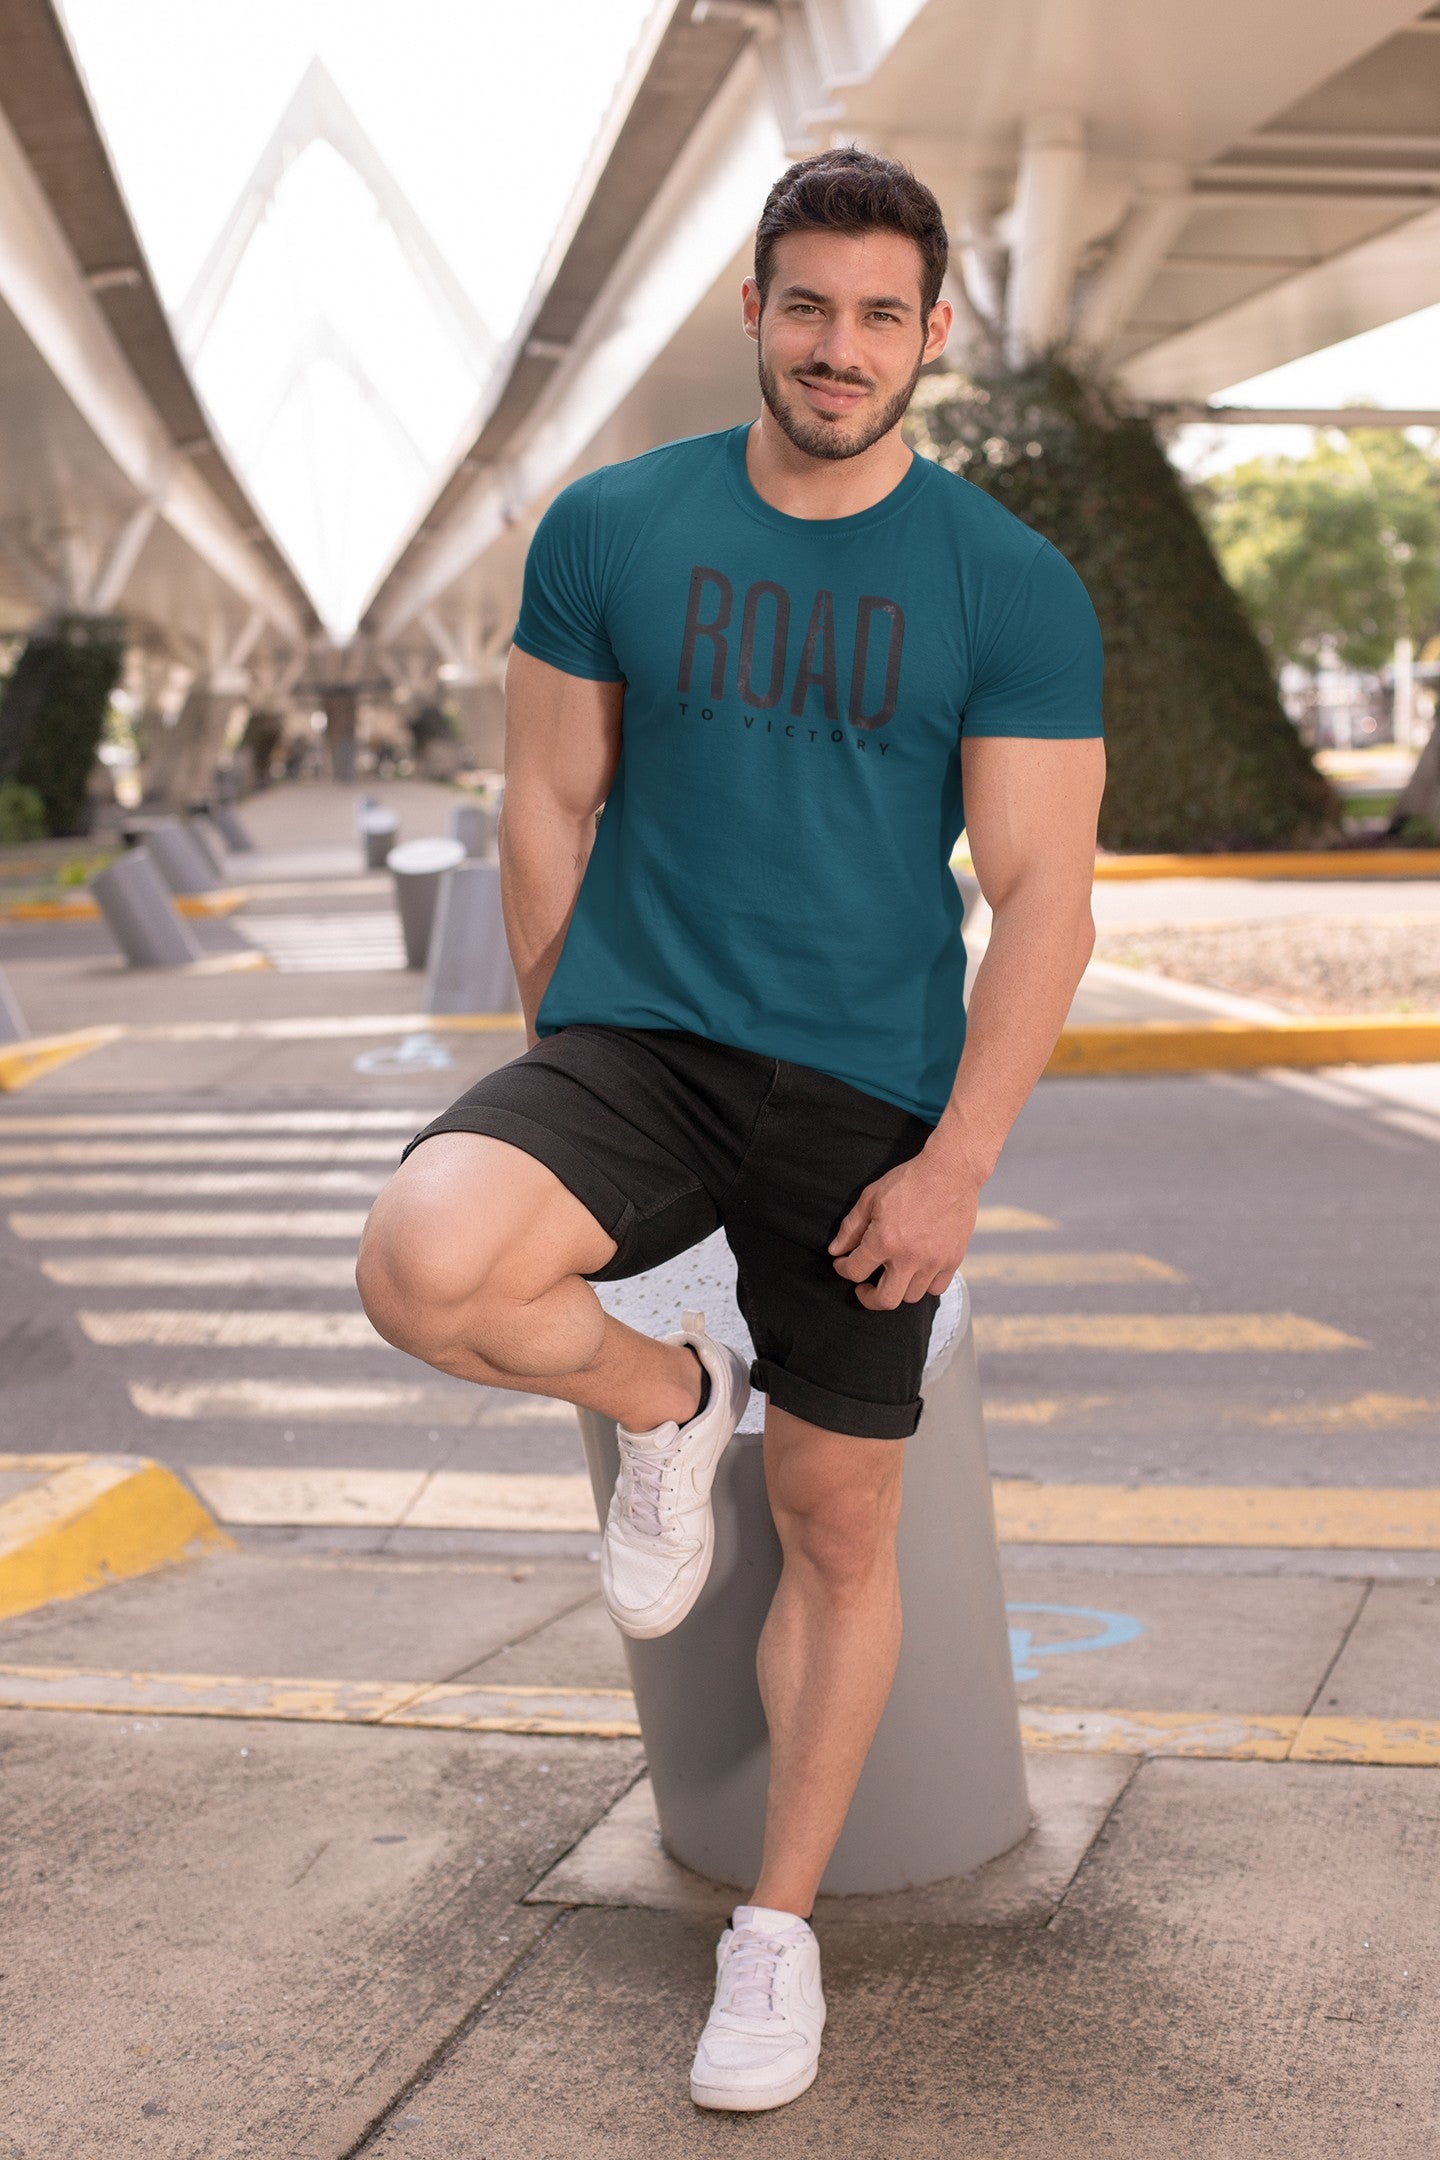 Gym T Shirt - On A Road To Victory with premium cotton Lycra. The Sports T Shirt by Strong Soul